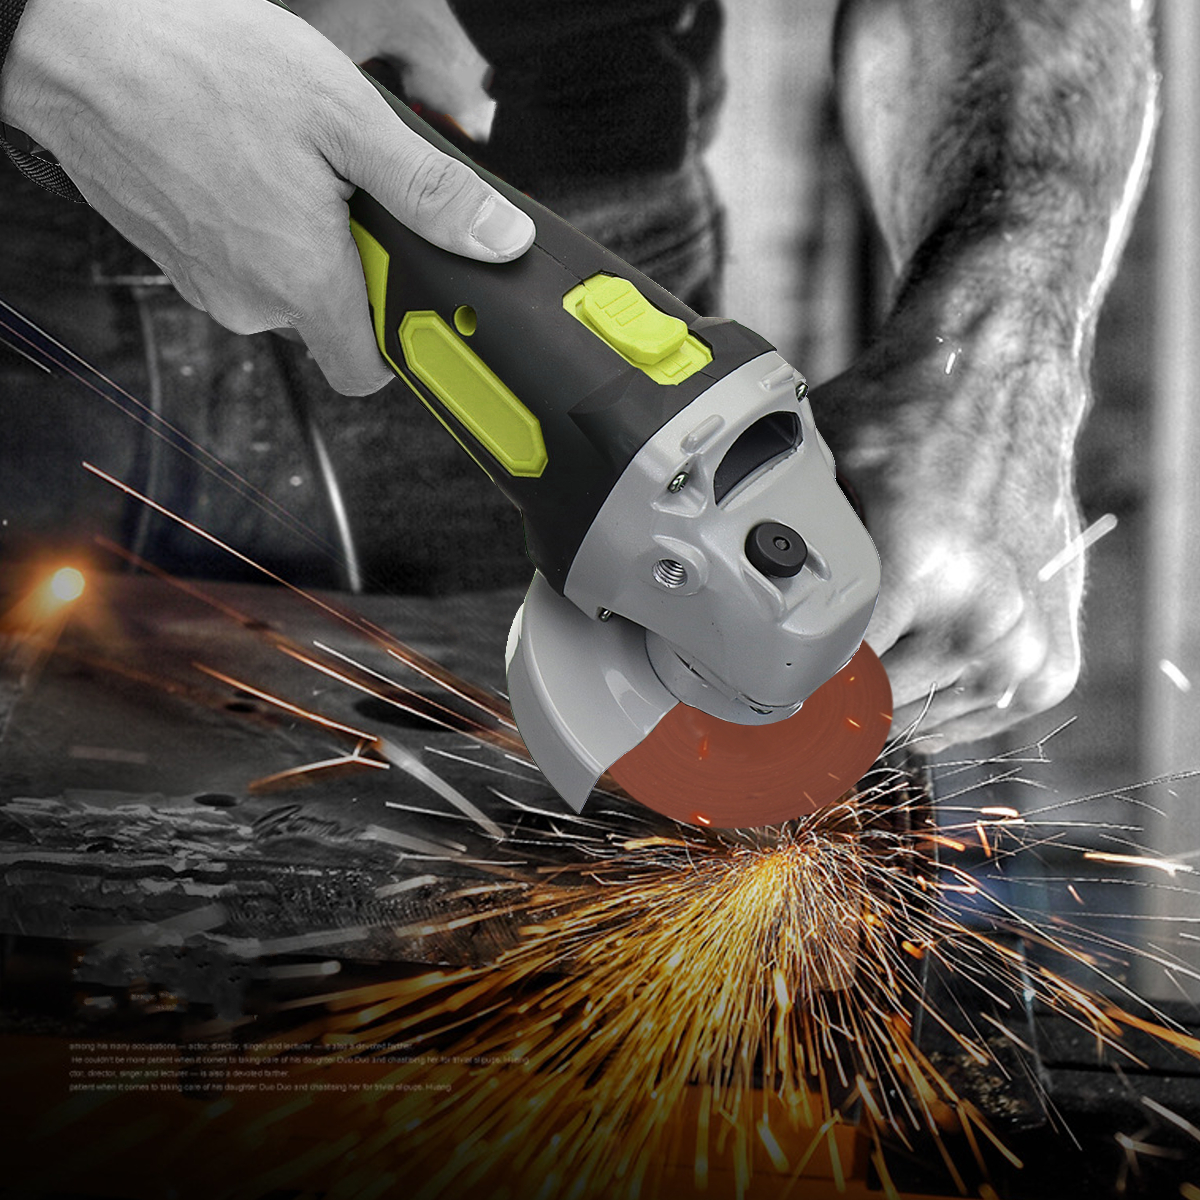 188VF218VF-Brushless-Cordless-Angle-Grinder-Electric-Power-Angle-Grinding-Cutting-W-1-or-2-Li-ion-Ba-1431177-1